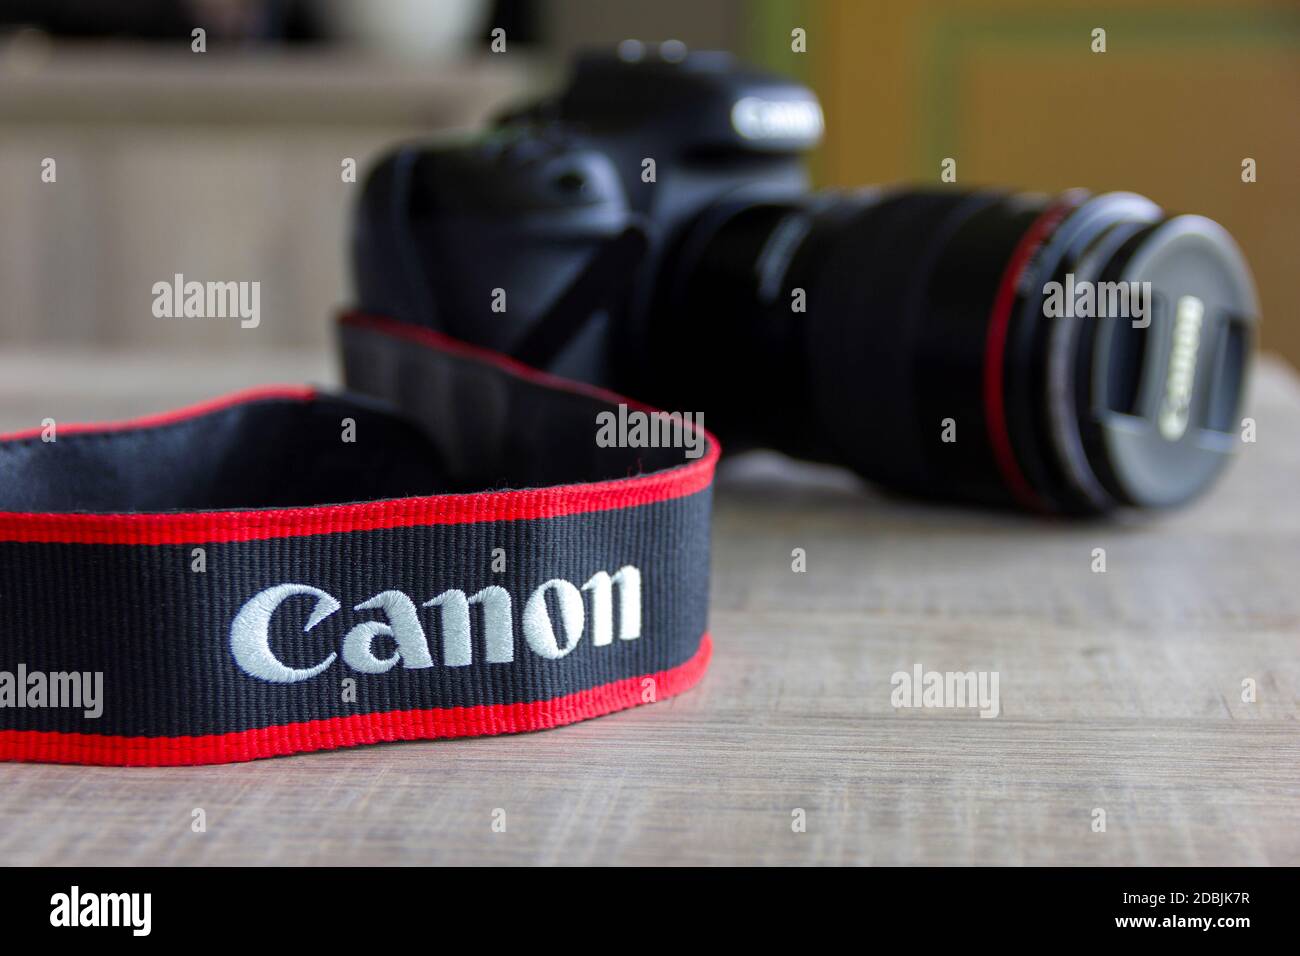 Brecht, Belgium - April 30 2020: A portrait of a canon camera lying on a table with the strap with the company logo in focus. Stock Photo